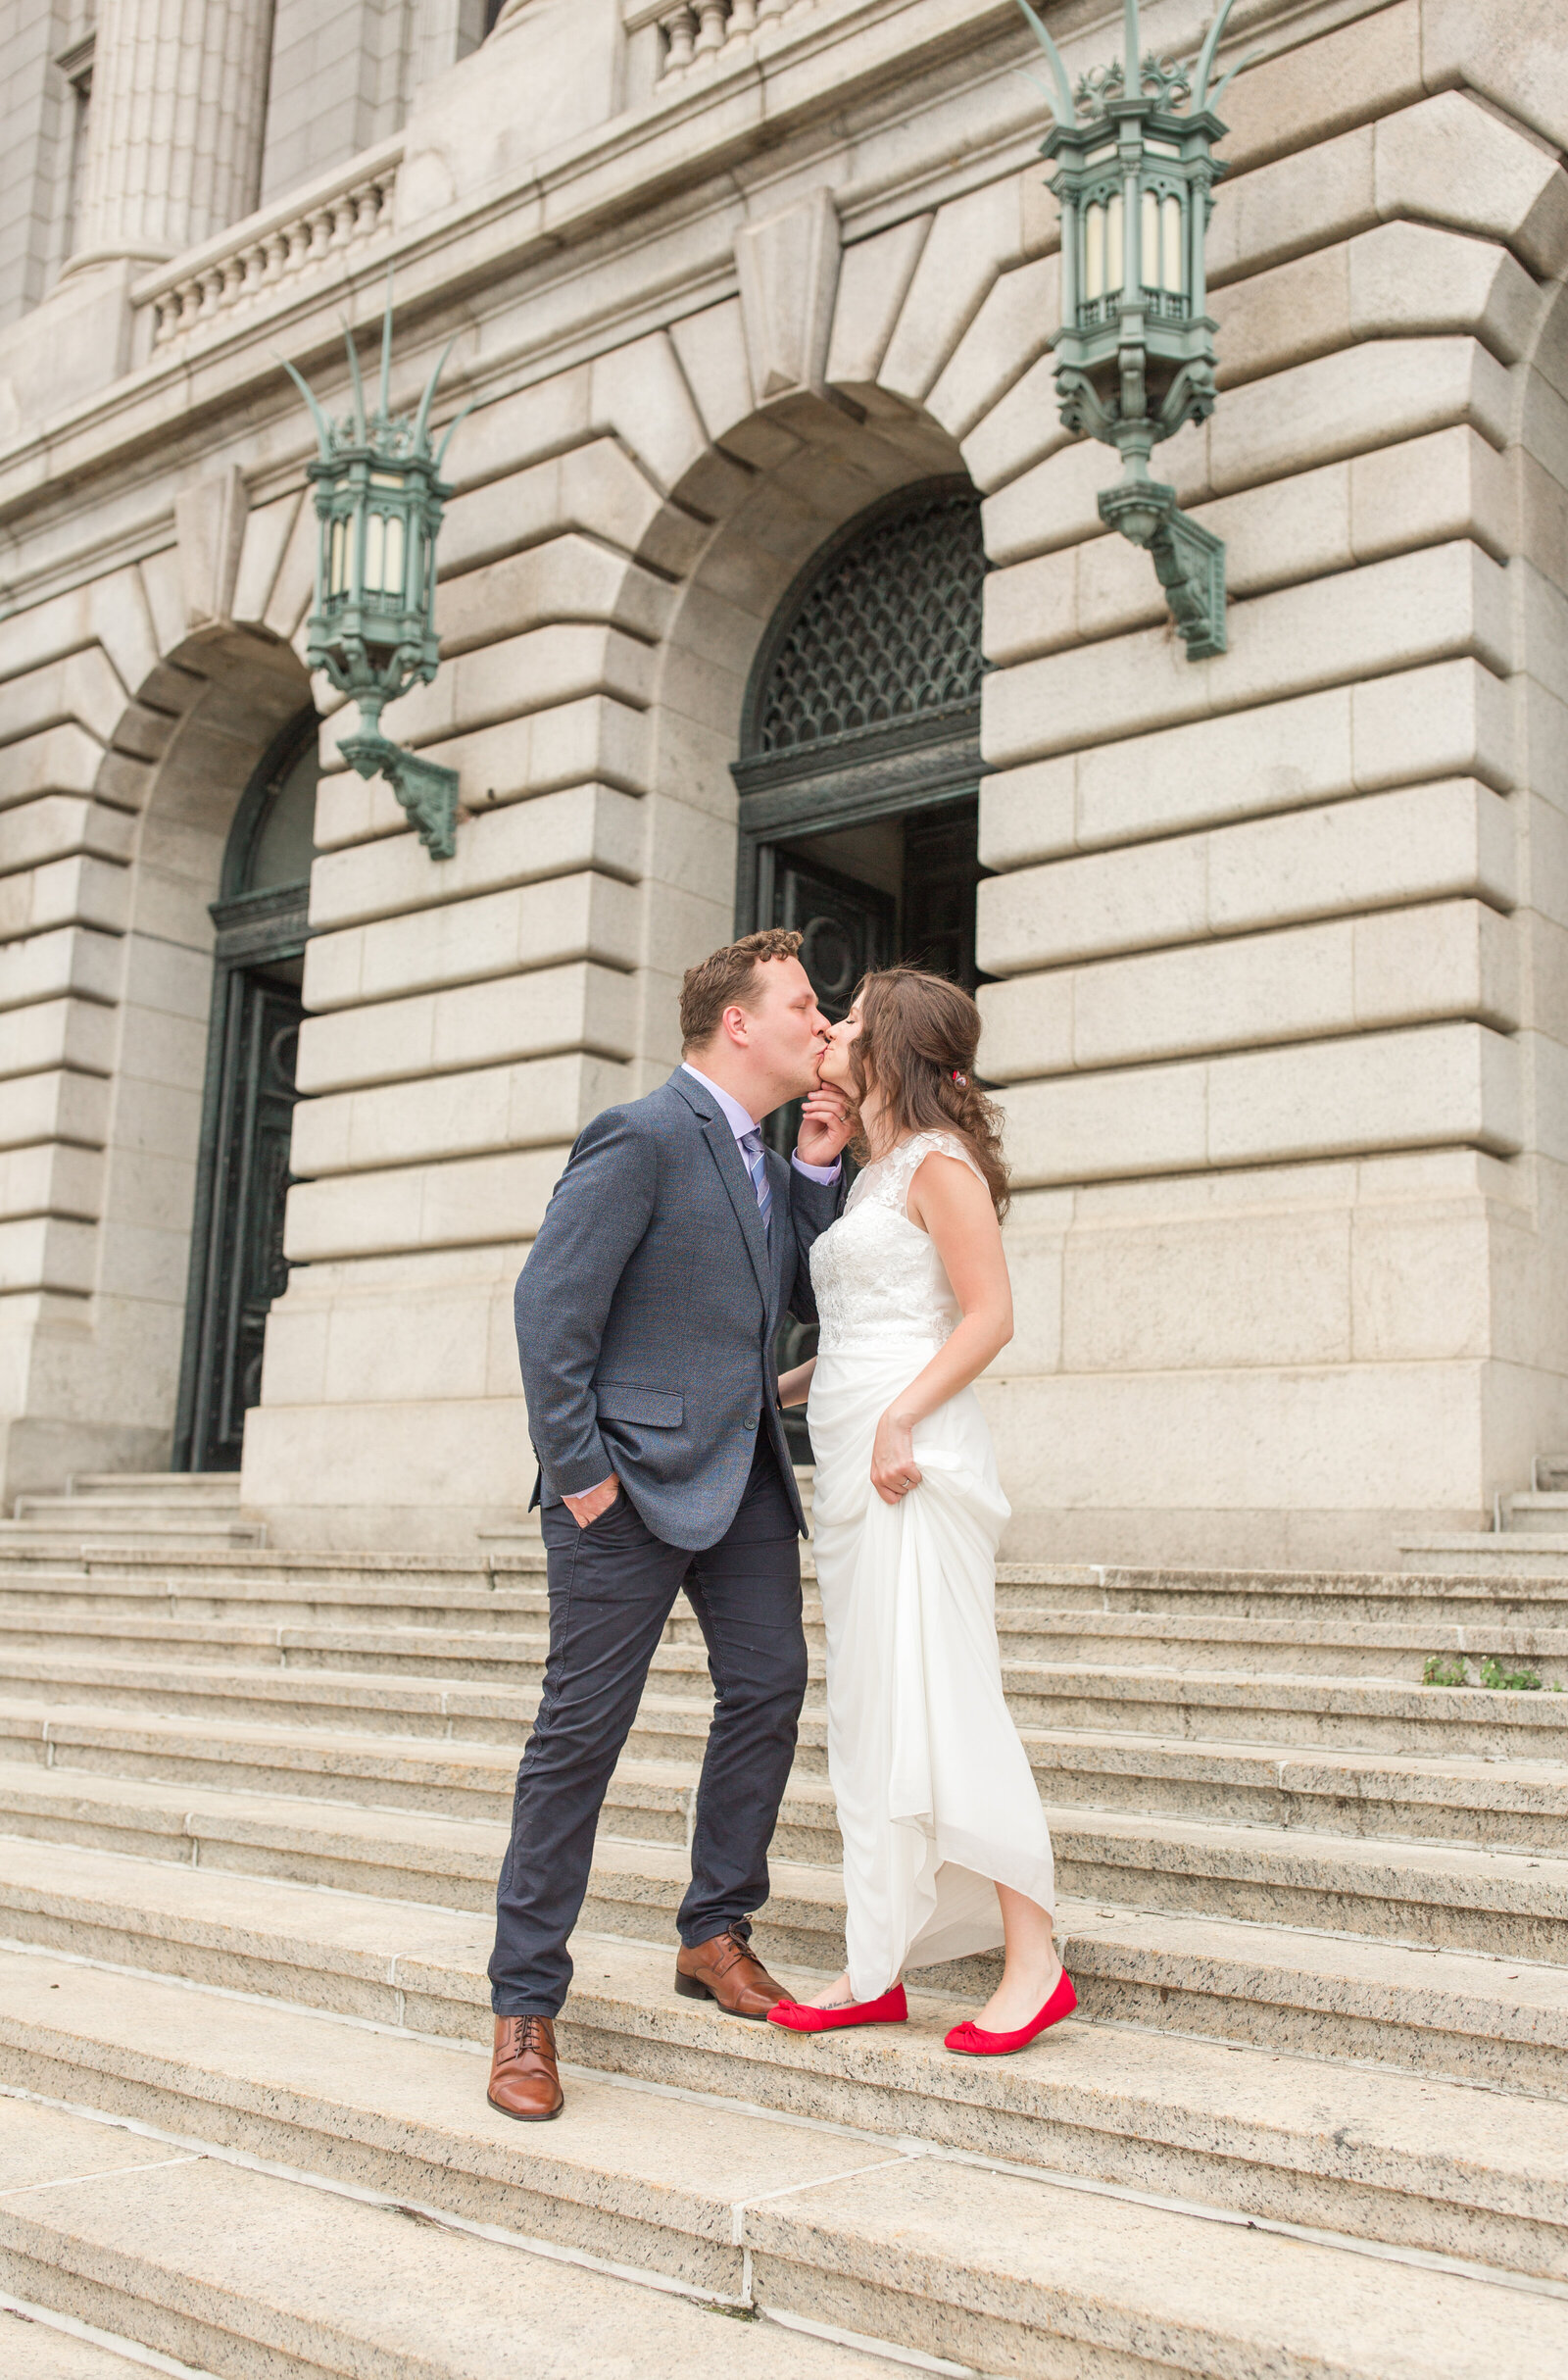 danielle-sam-cleveland-wedding-allison-ewing-photography-old-courthouse-FINAL-1-24